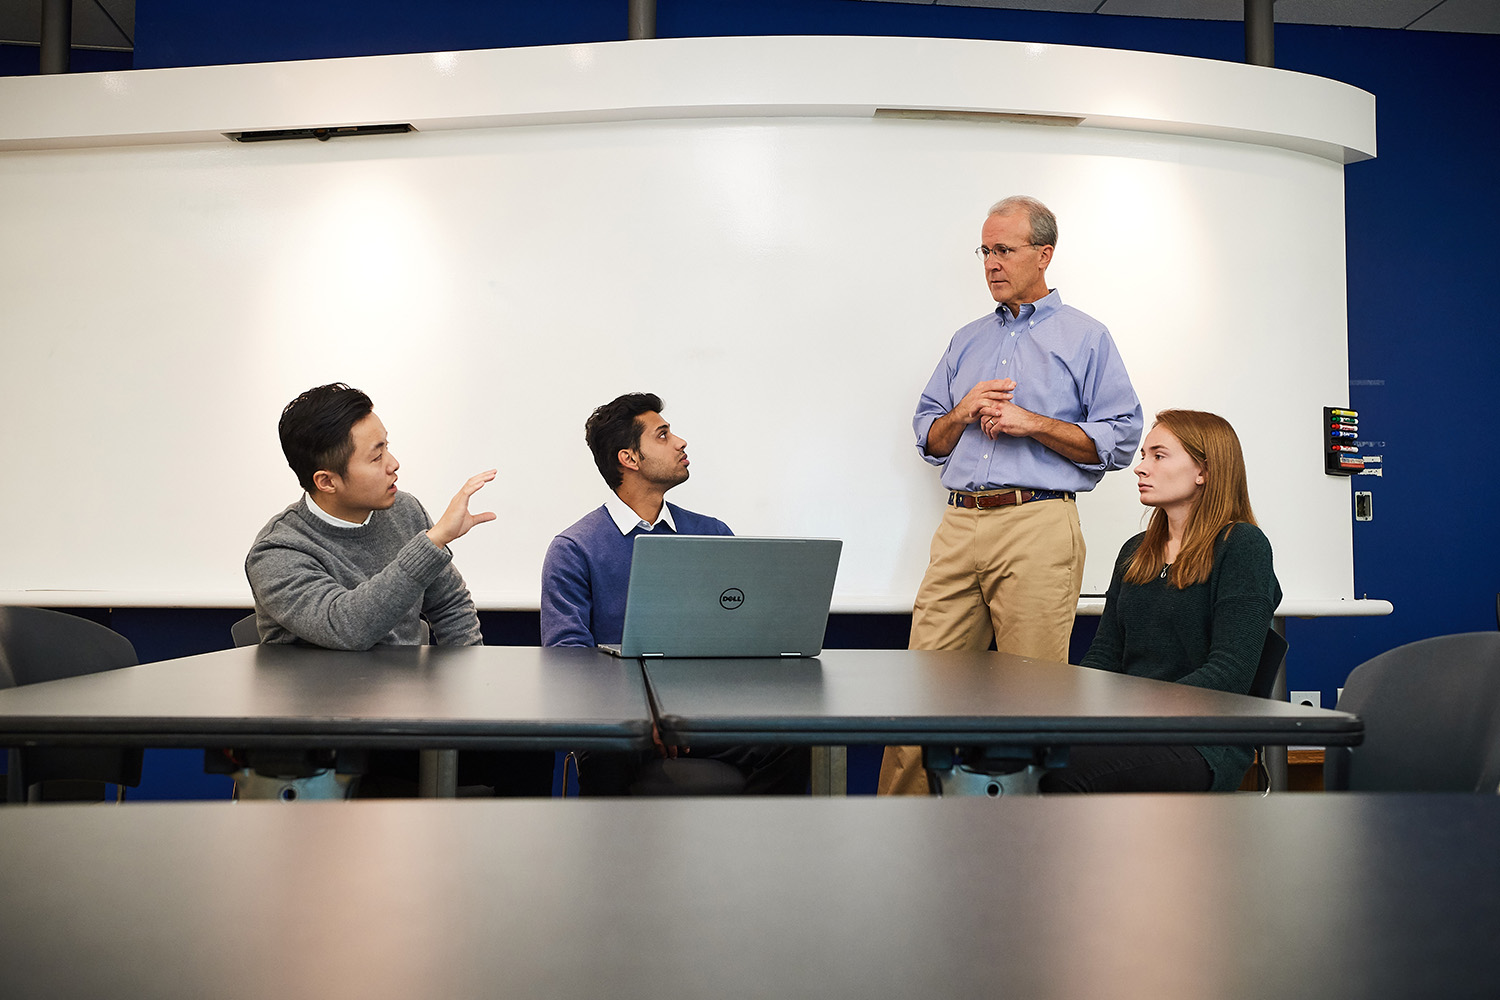 Former Goldman Sachs partner Blake Mather, advisor to a new Student Managed Fund at UConn Stamford, meets with student managed fund members Di Yang, left, Anshul Manglani, both graduate students, and Lindsey Lozyniak '19 (BUS). (Peter Morenus/UConn Photo)